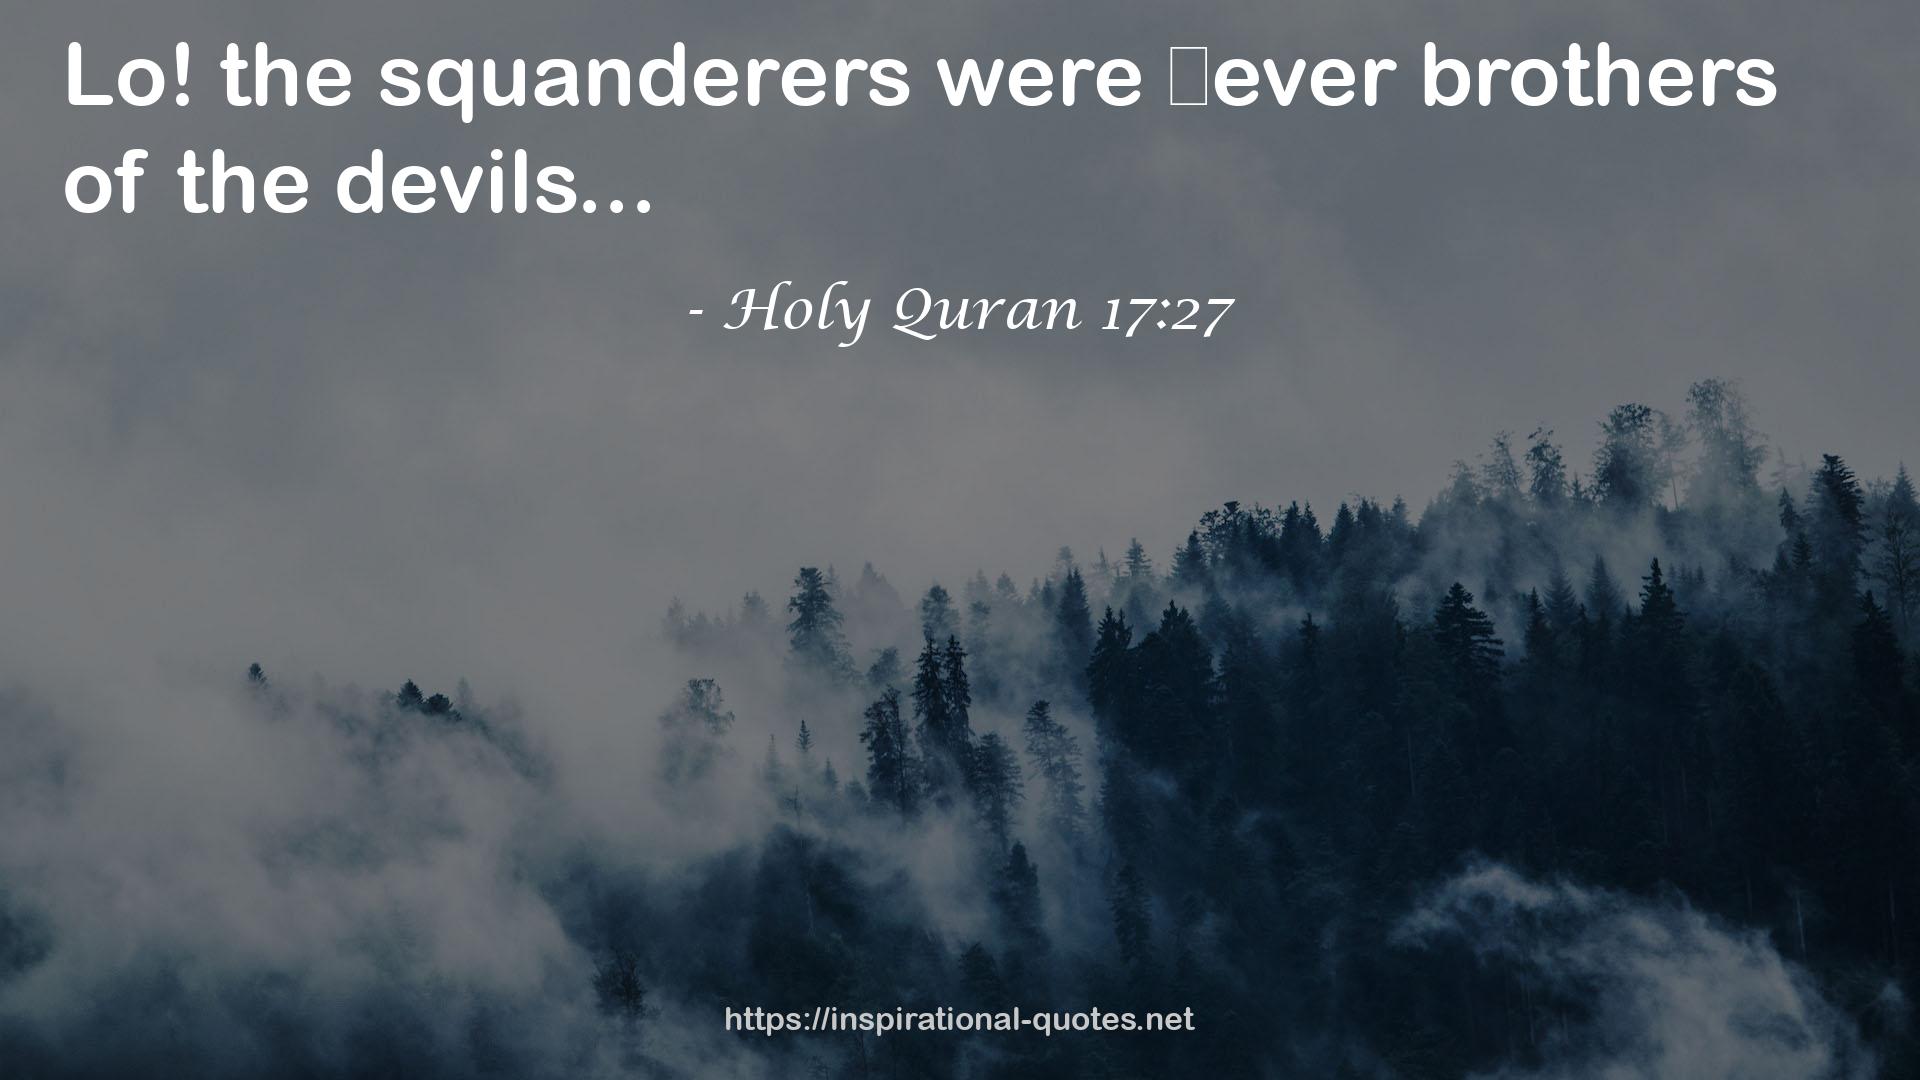 Holy Quran 17:27 QUOTES